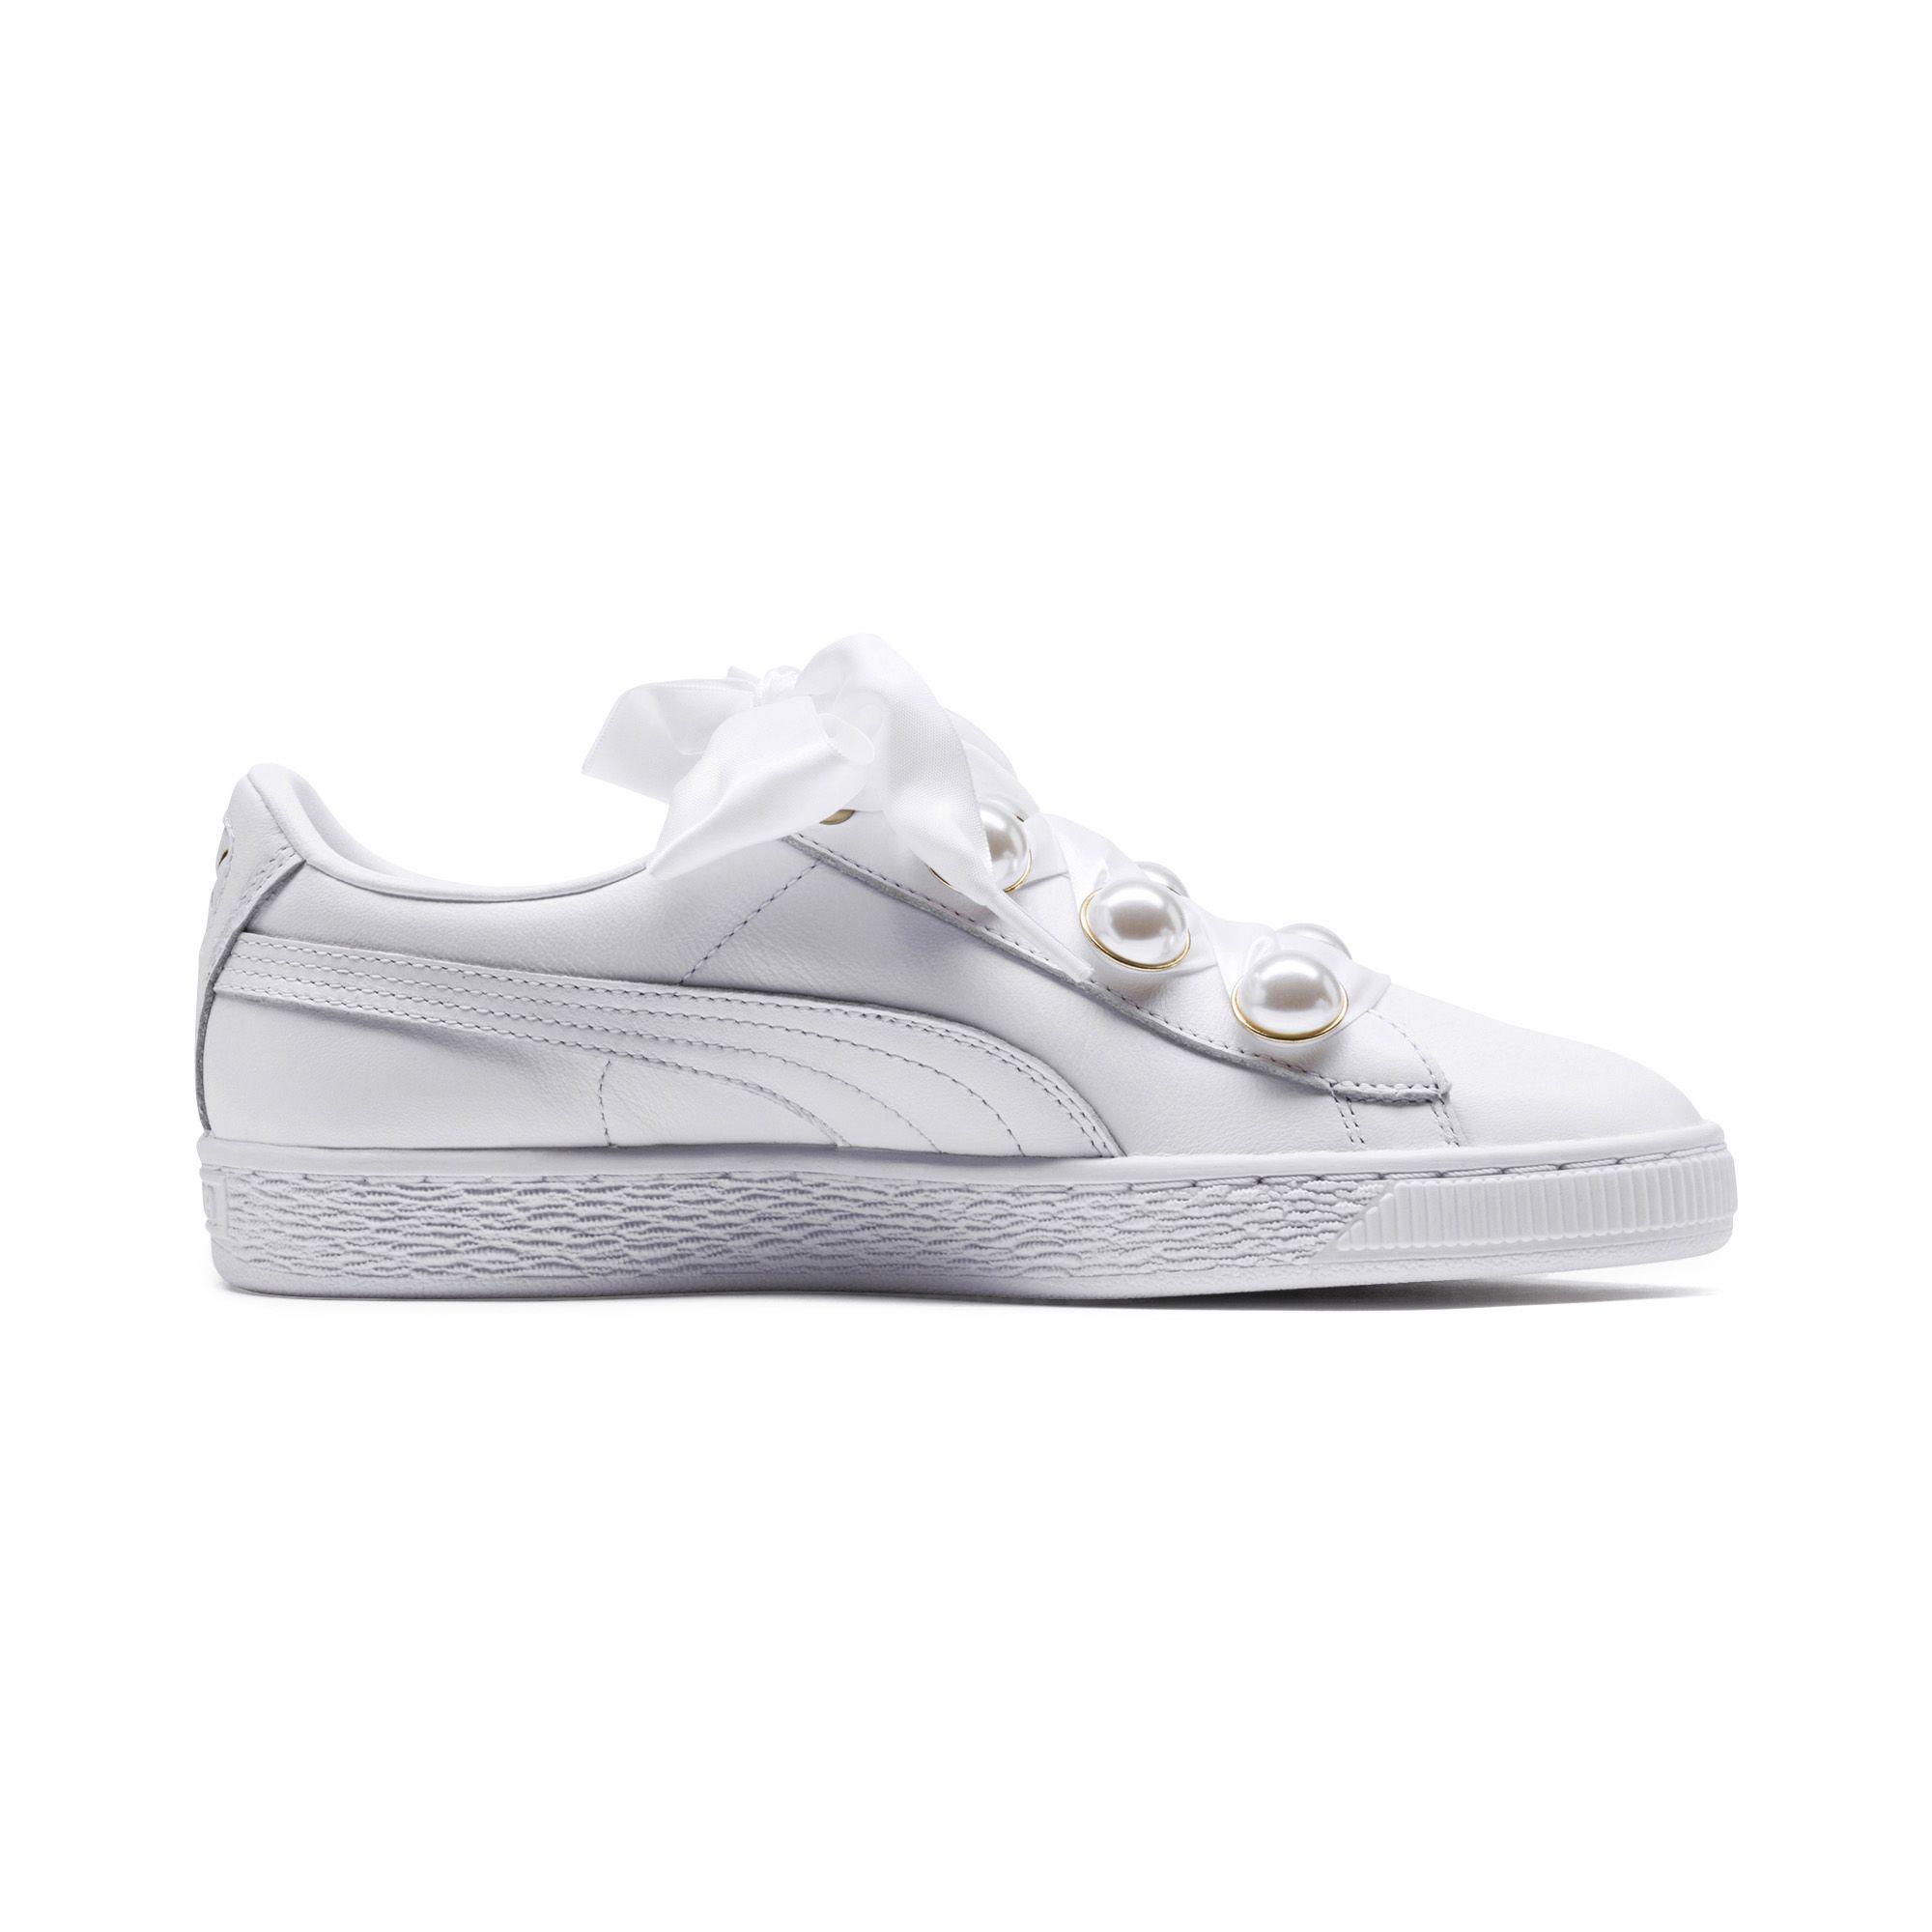 PUMA Leather Basket Bling 's Sneakers - Lyst